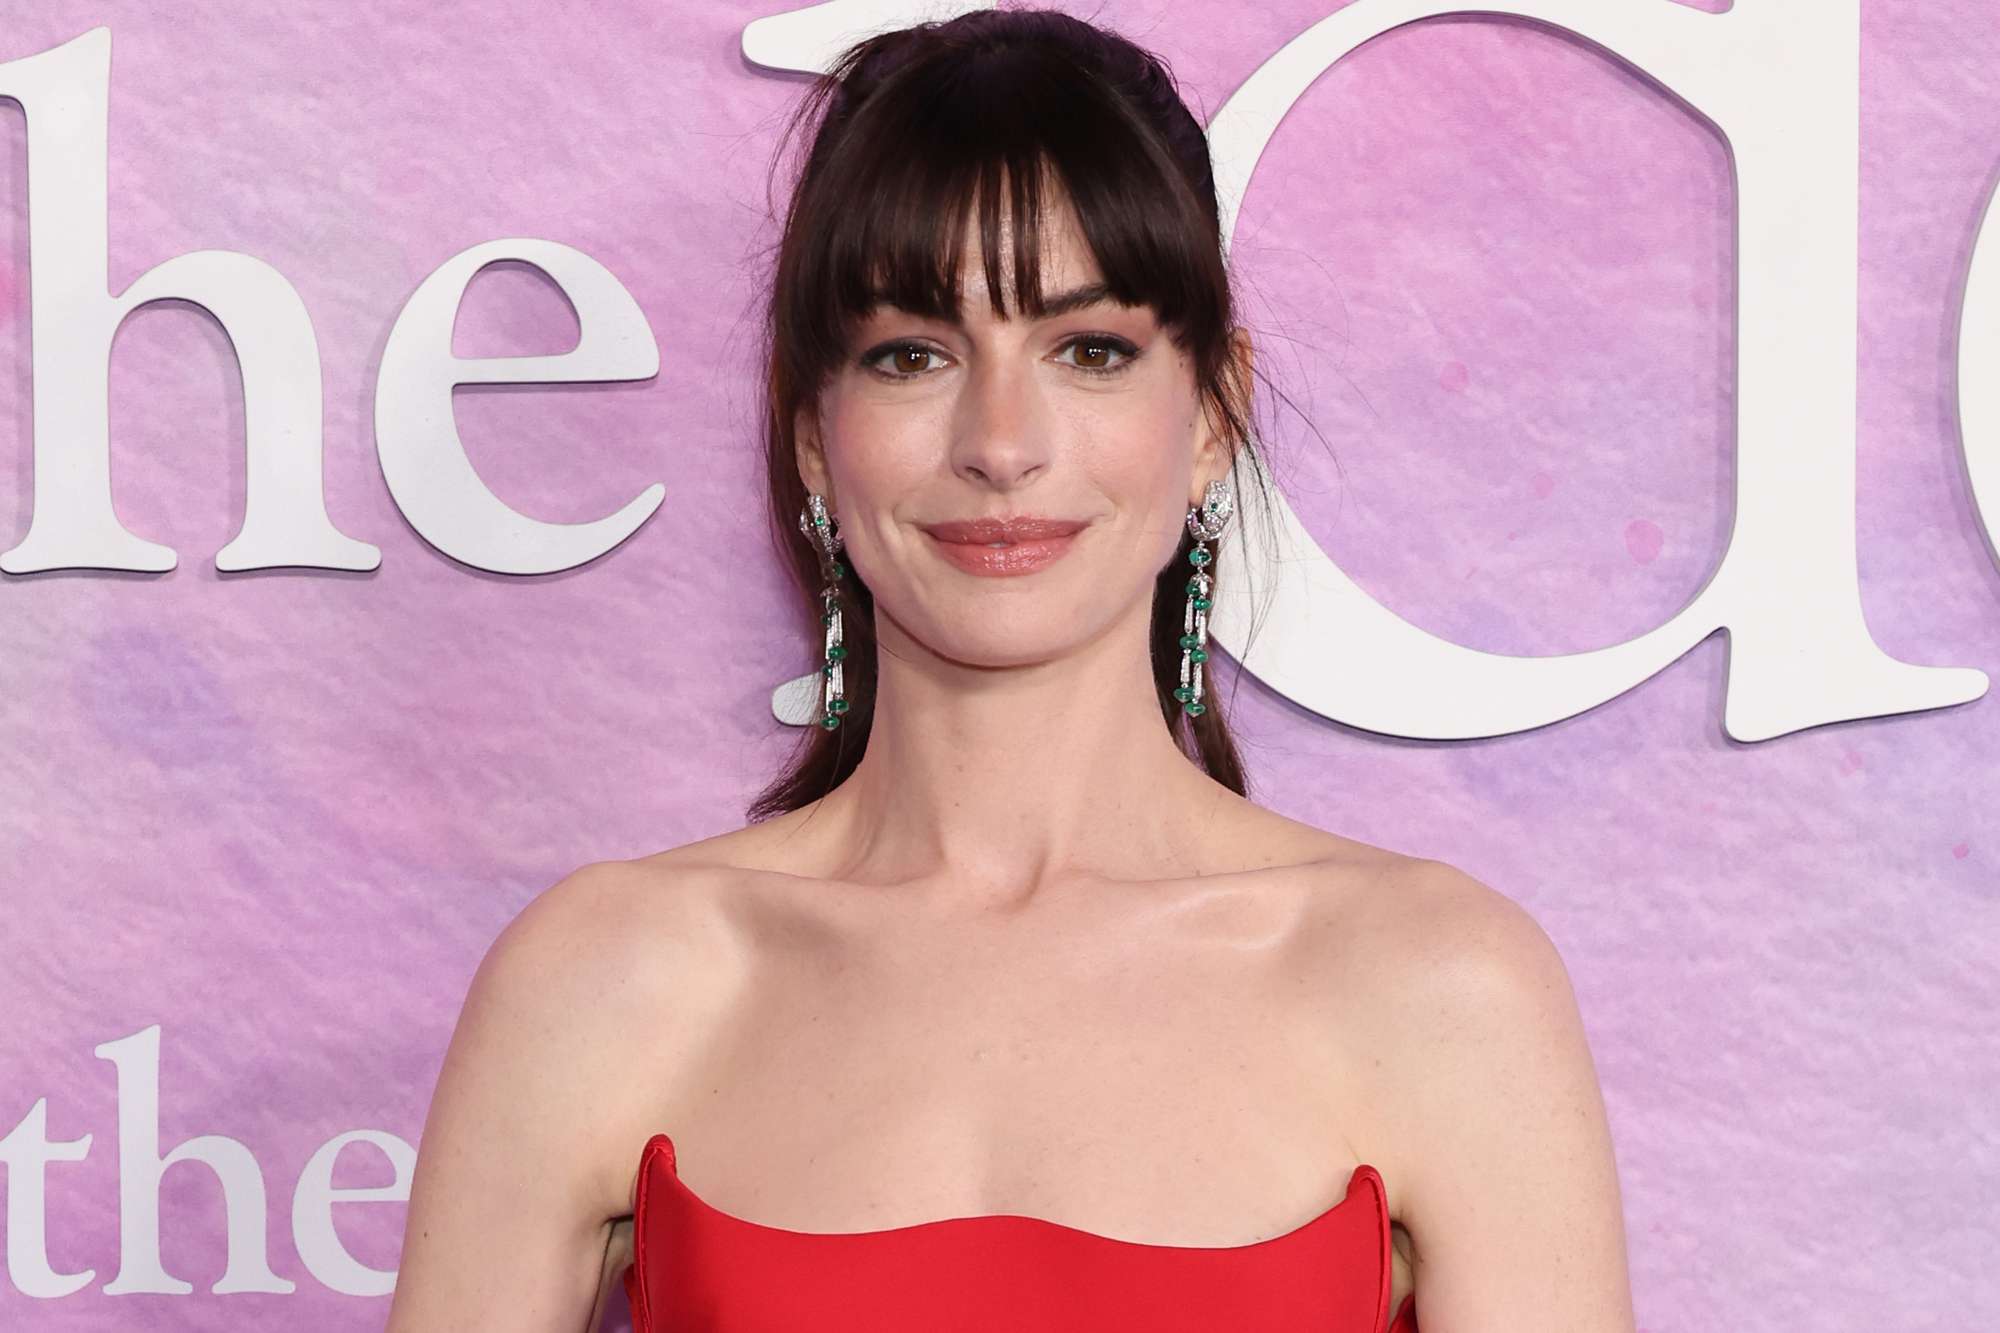 Anne Hathaway Says She Got a “Devil Wears Prada ”Trivia Question Wrong: 'Genuinely Confused'